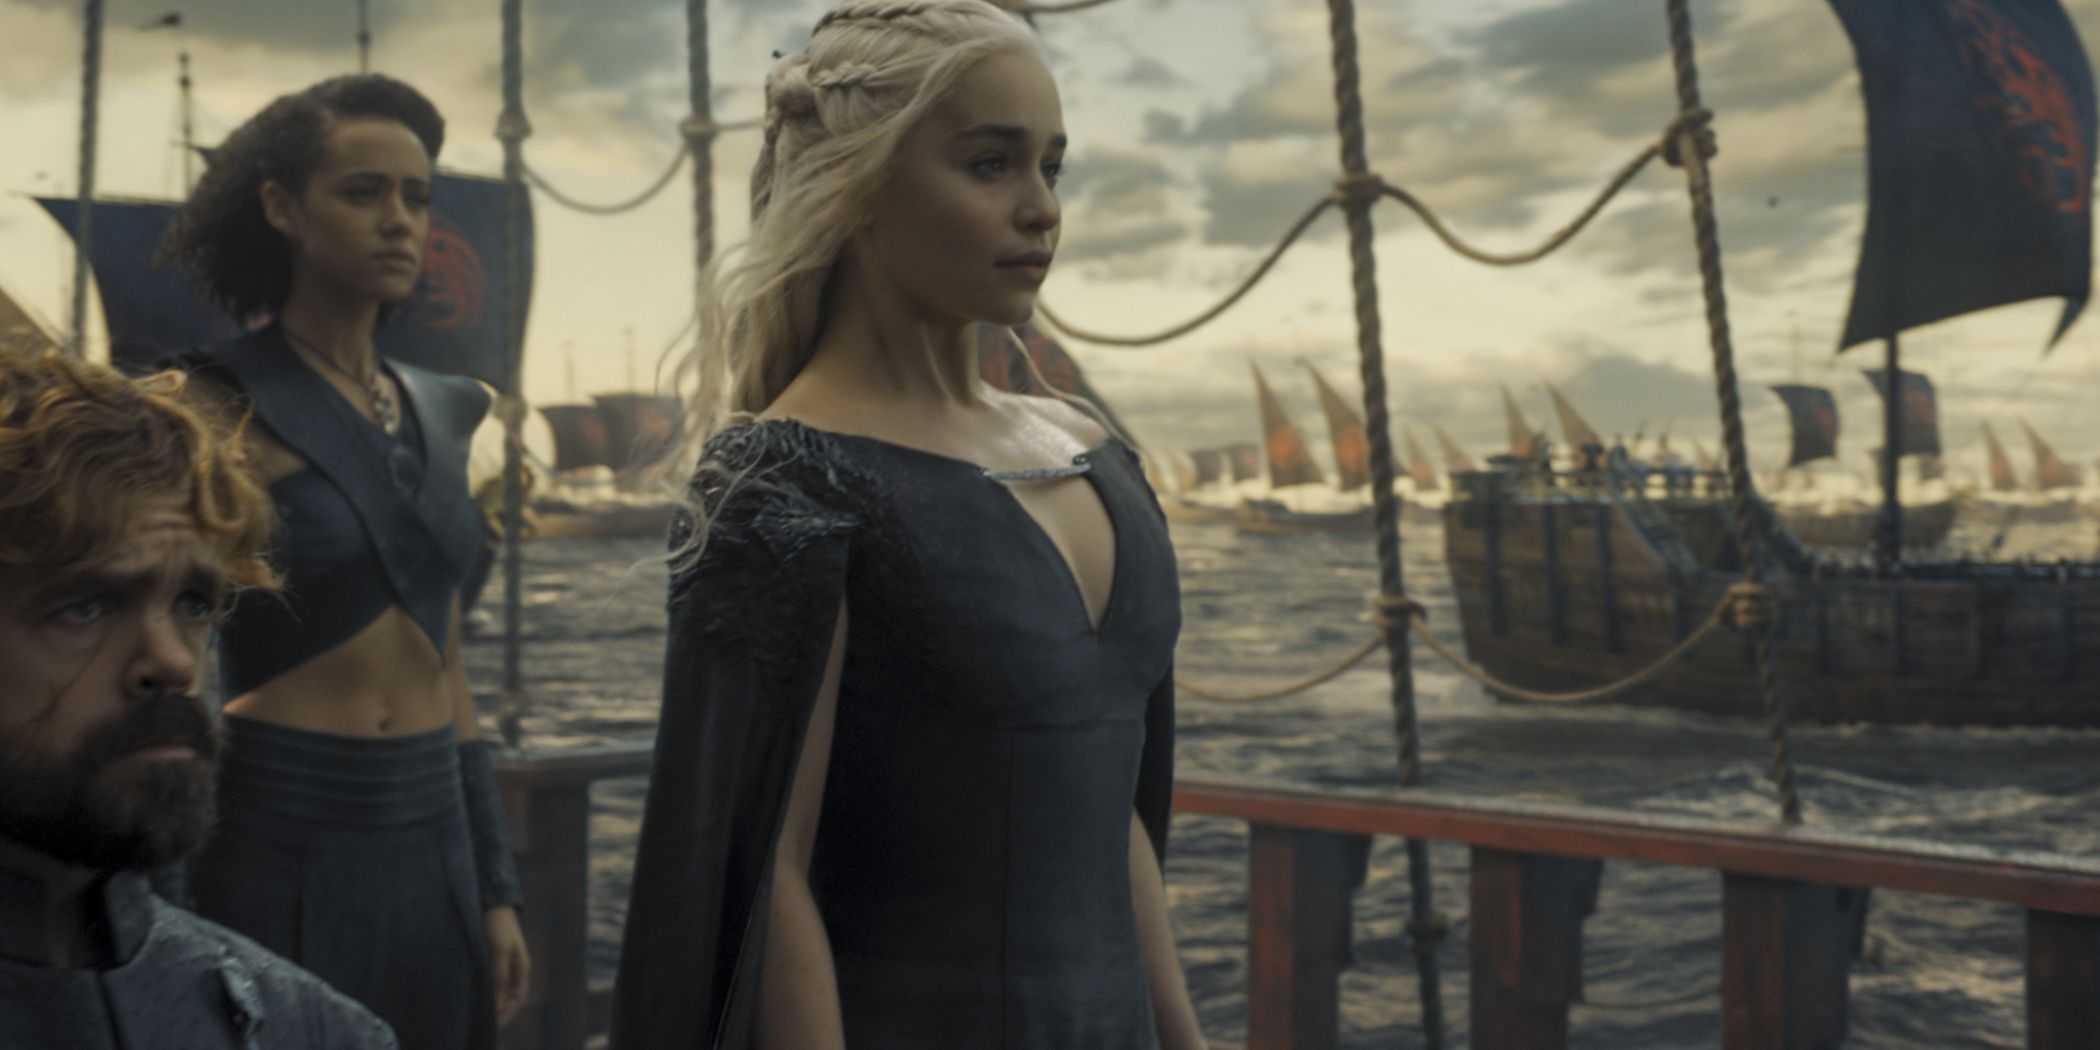 Daenerys sailing for Westeros in Game of Thrones